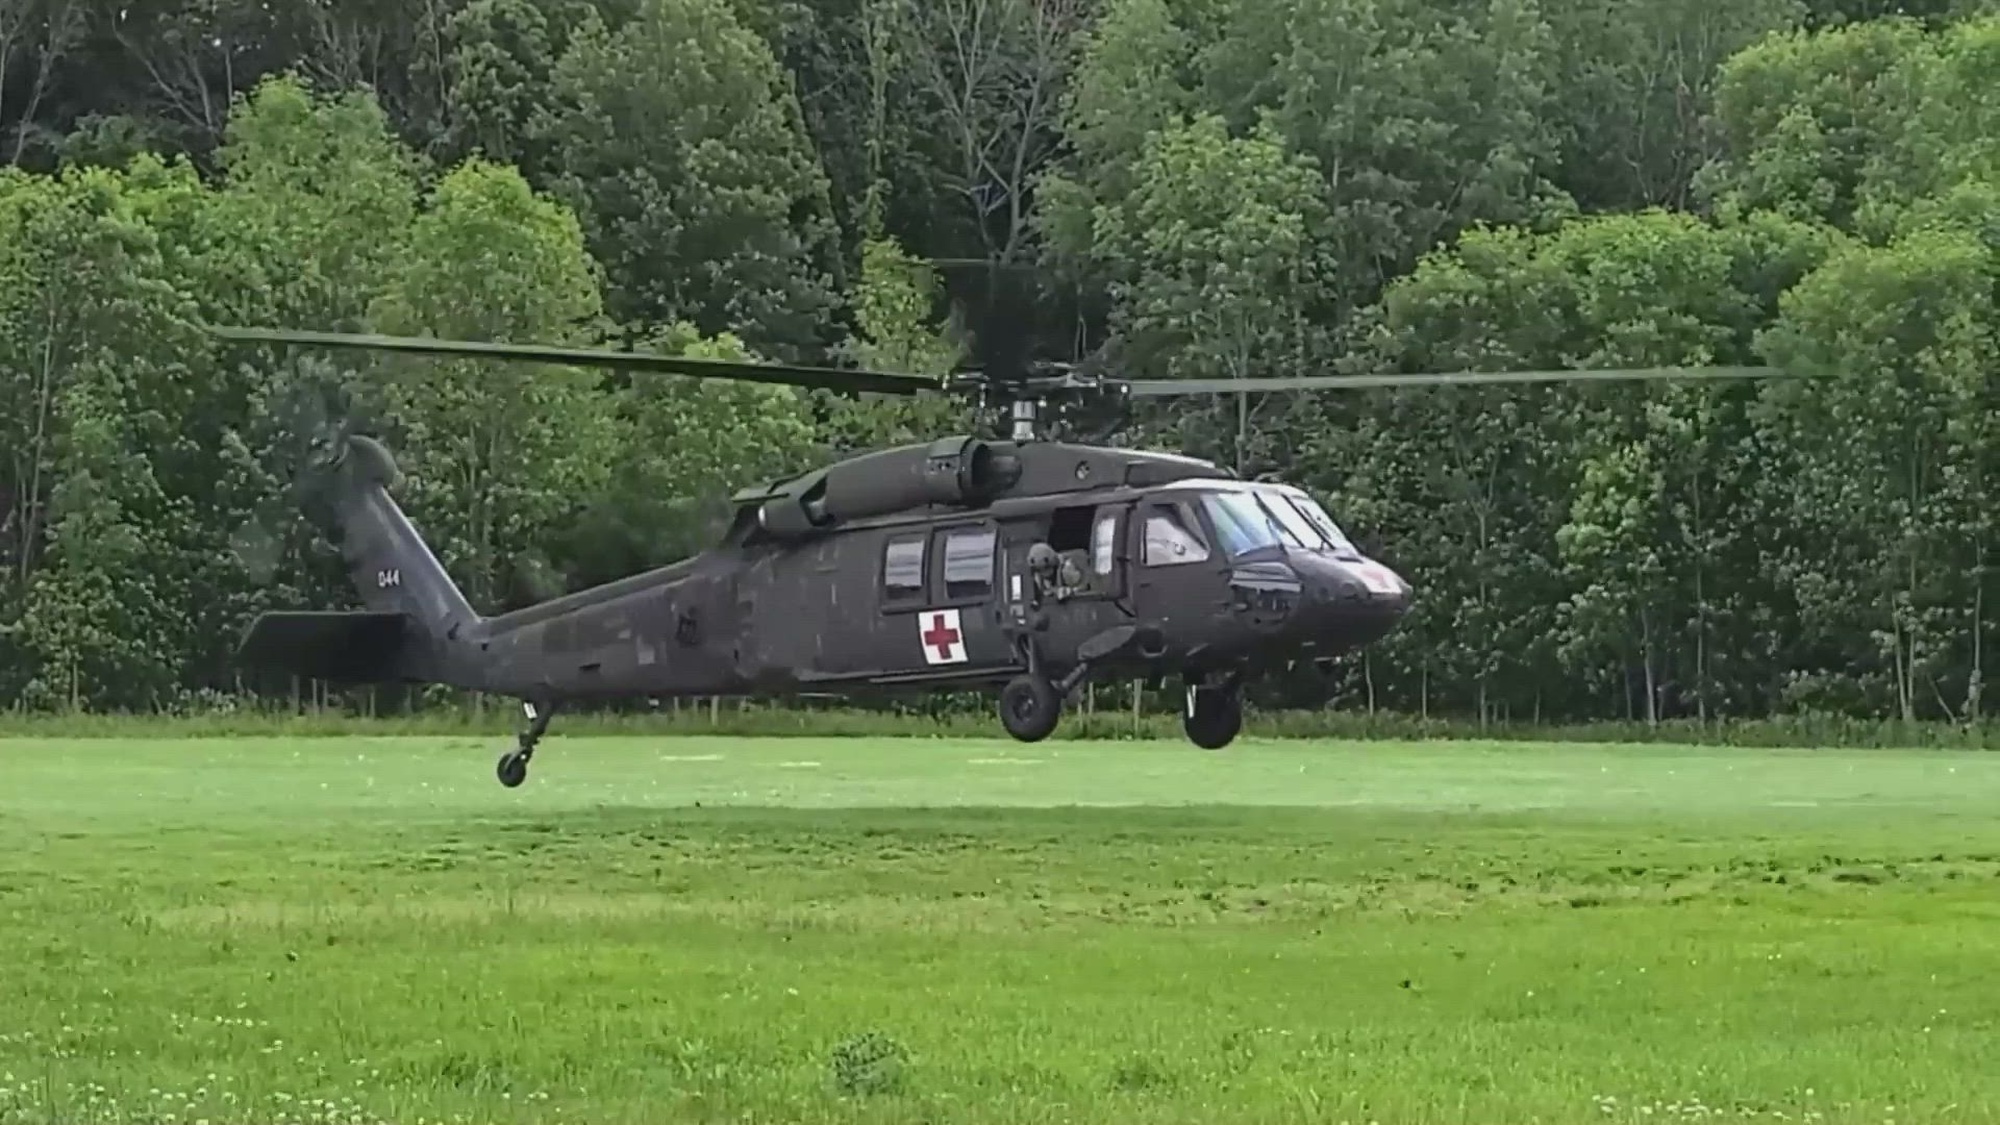 The 7207th Medical Support Unit along with participants from the National Guard and active duty components came together to complete Soldier medical readiness missions and emergency medical response training June 10-13, 2022 in Rochester, New York..